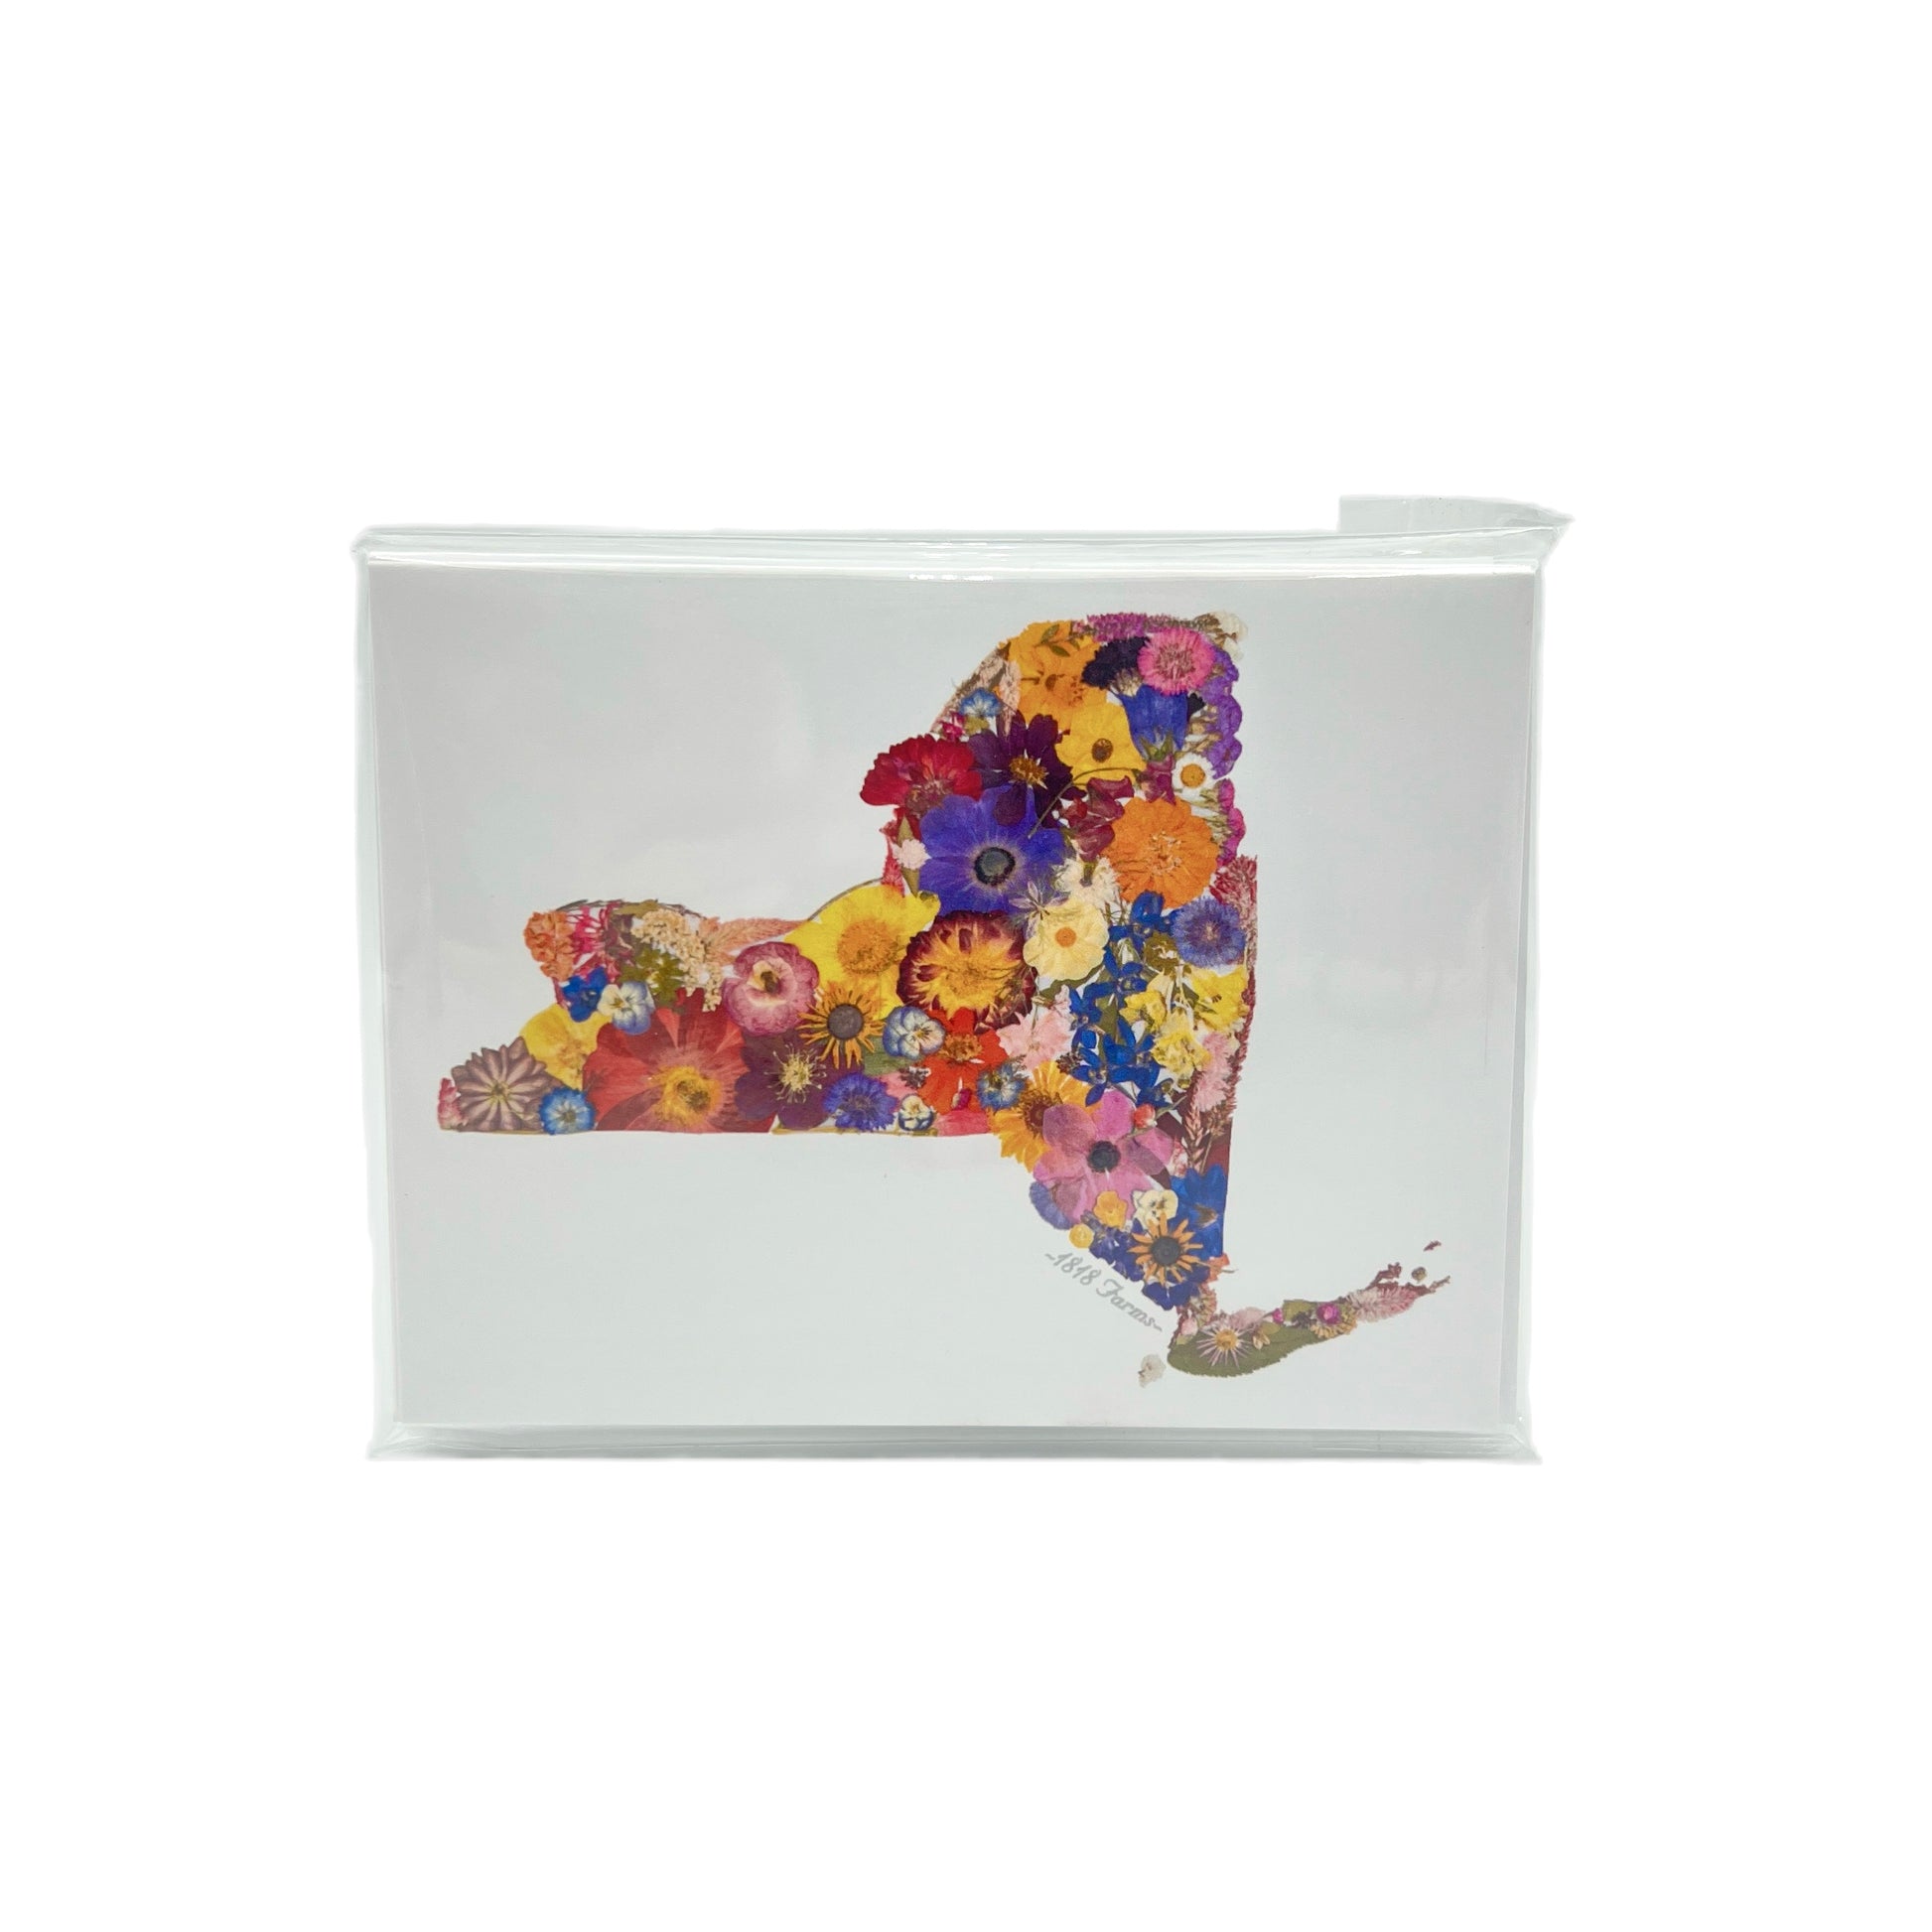 New York Themed Notecards (Set of 6)  - "Where I Bloom" Collection Notecard 1818 Farms   